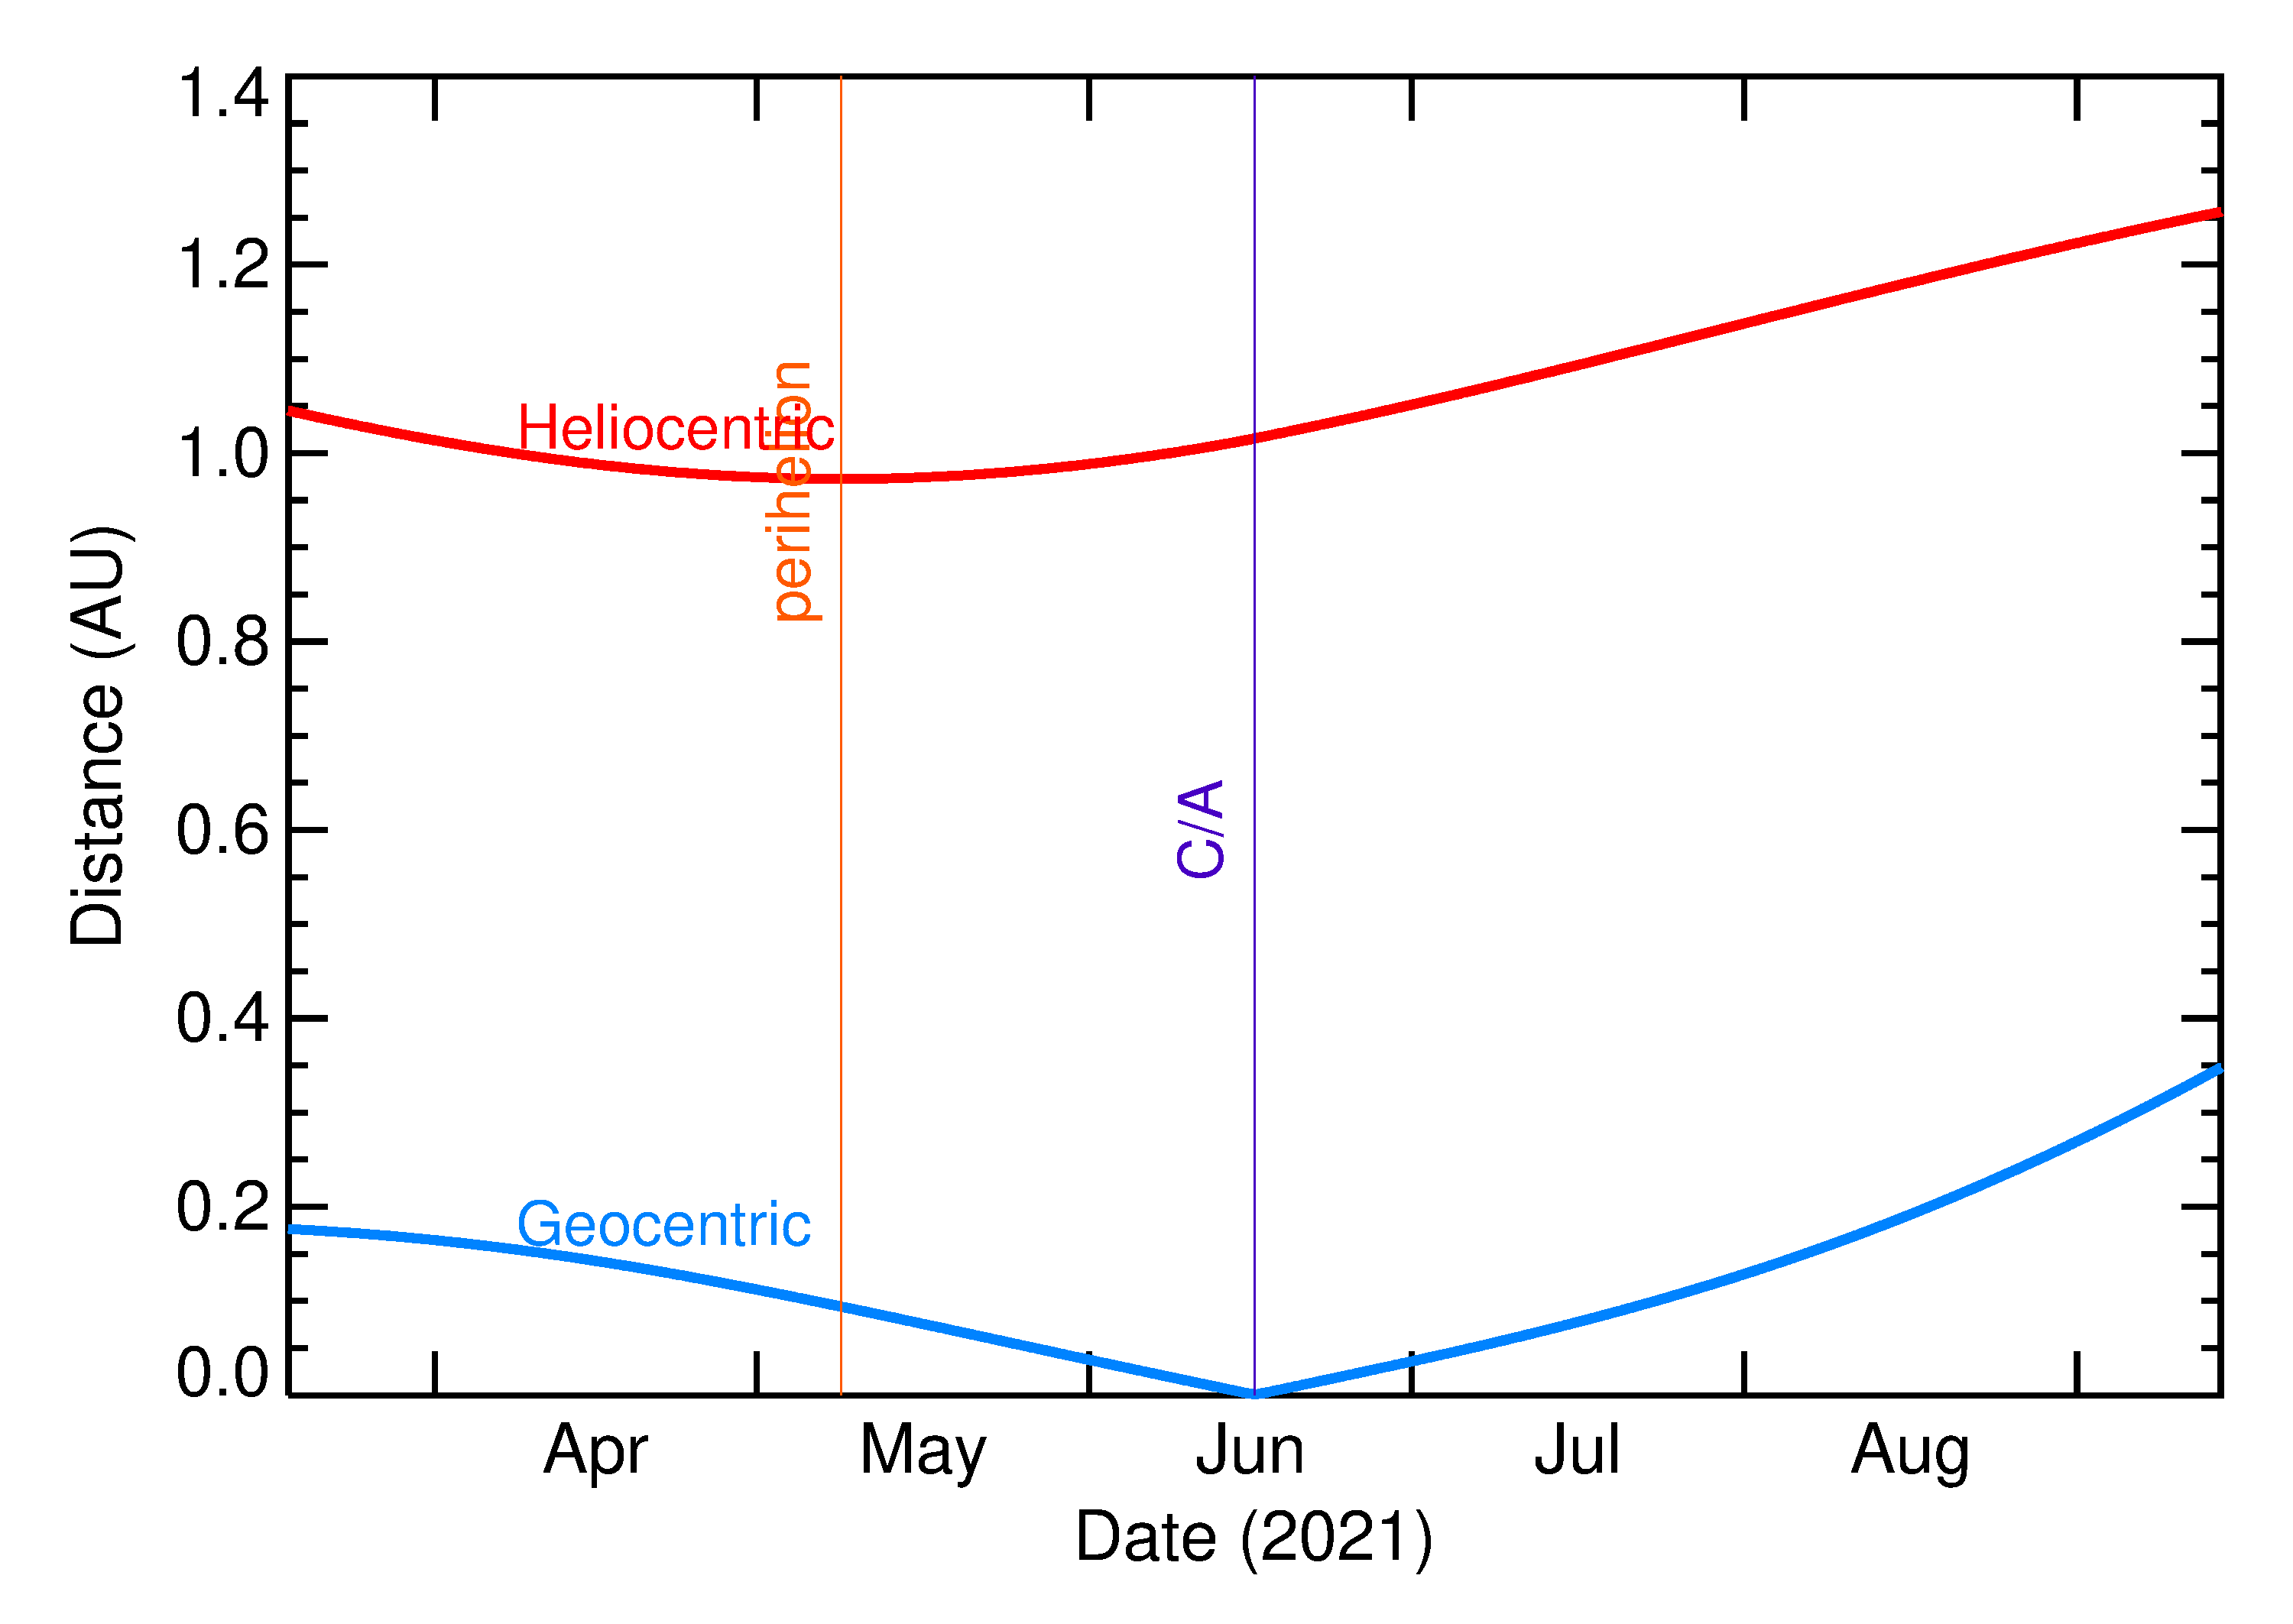 Heliocentric and Geocentric Distances of 2021 MU in the months around closest approach